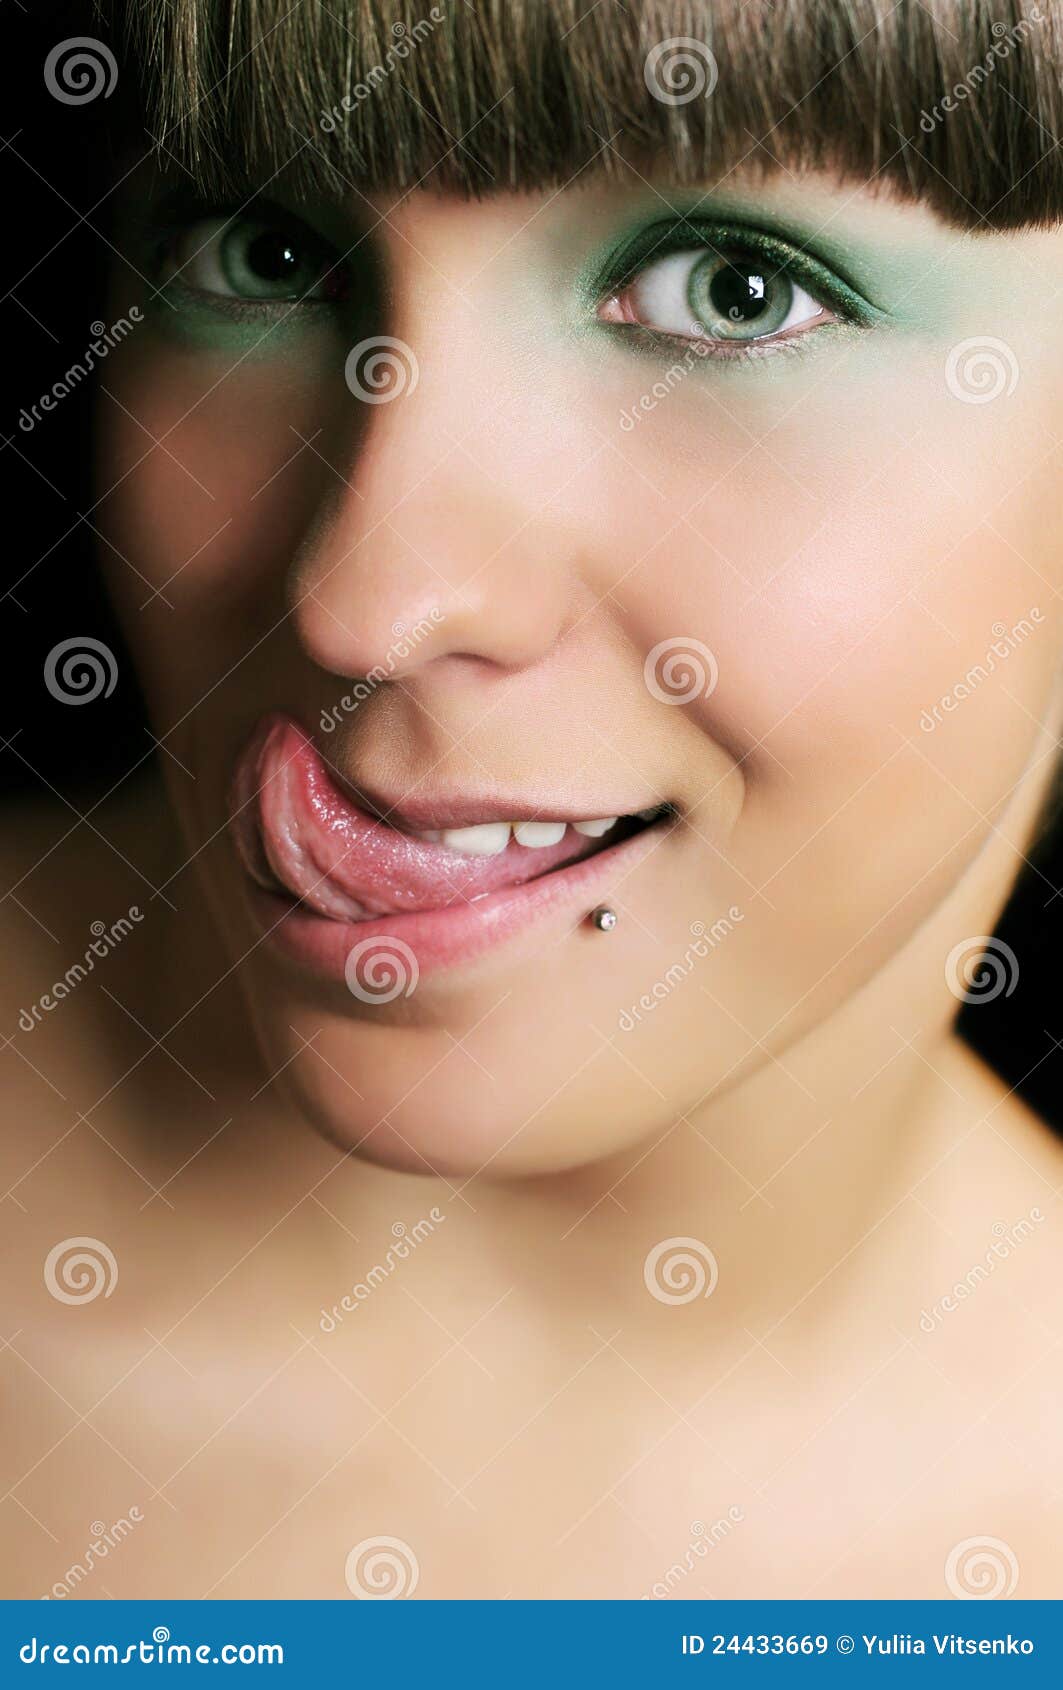 Funny Expressive Teen Girl Sticking Out Tongue Stock Image Image Of Nonconformity Individual